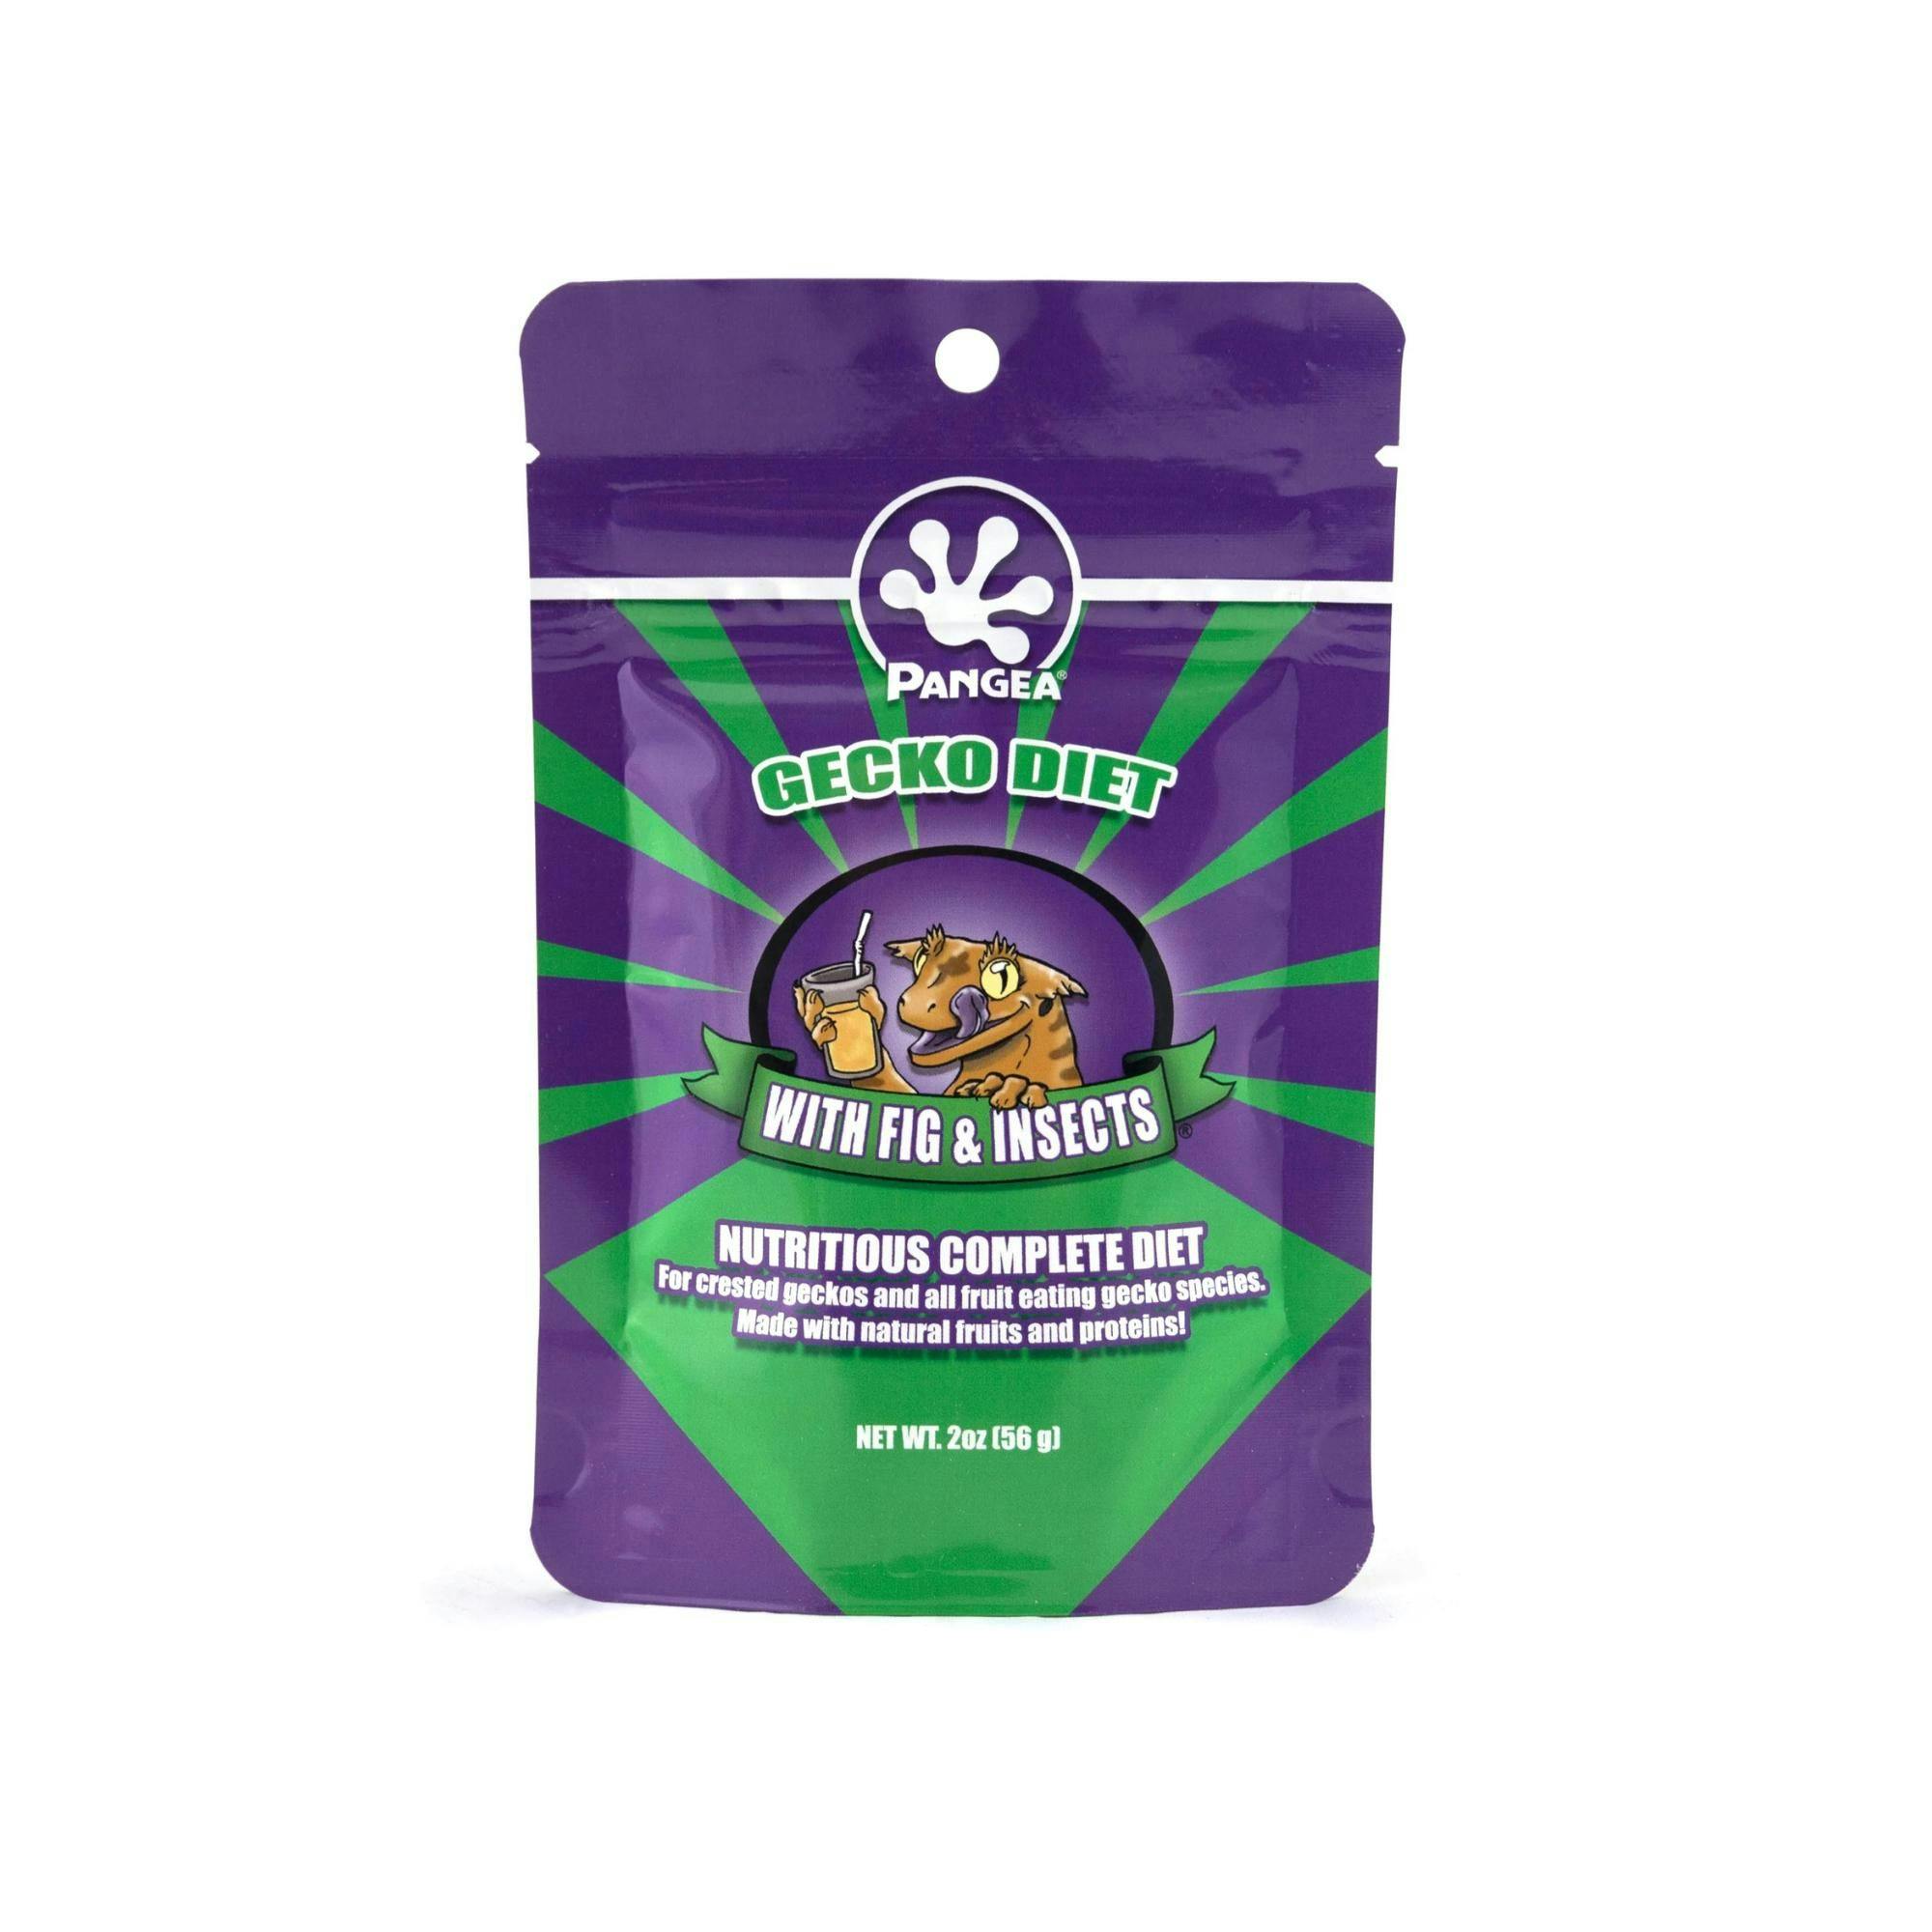 Image for Pangea Gecko Diet with Fig & Insects (2 oz) by Josh's Frogs